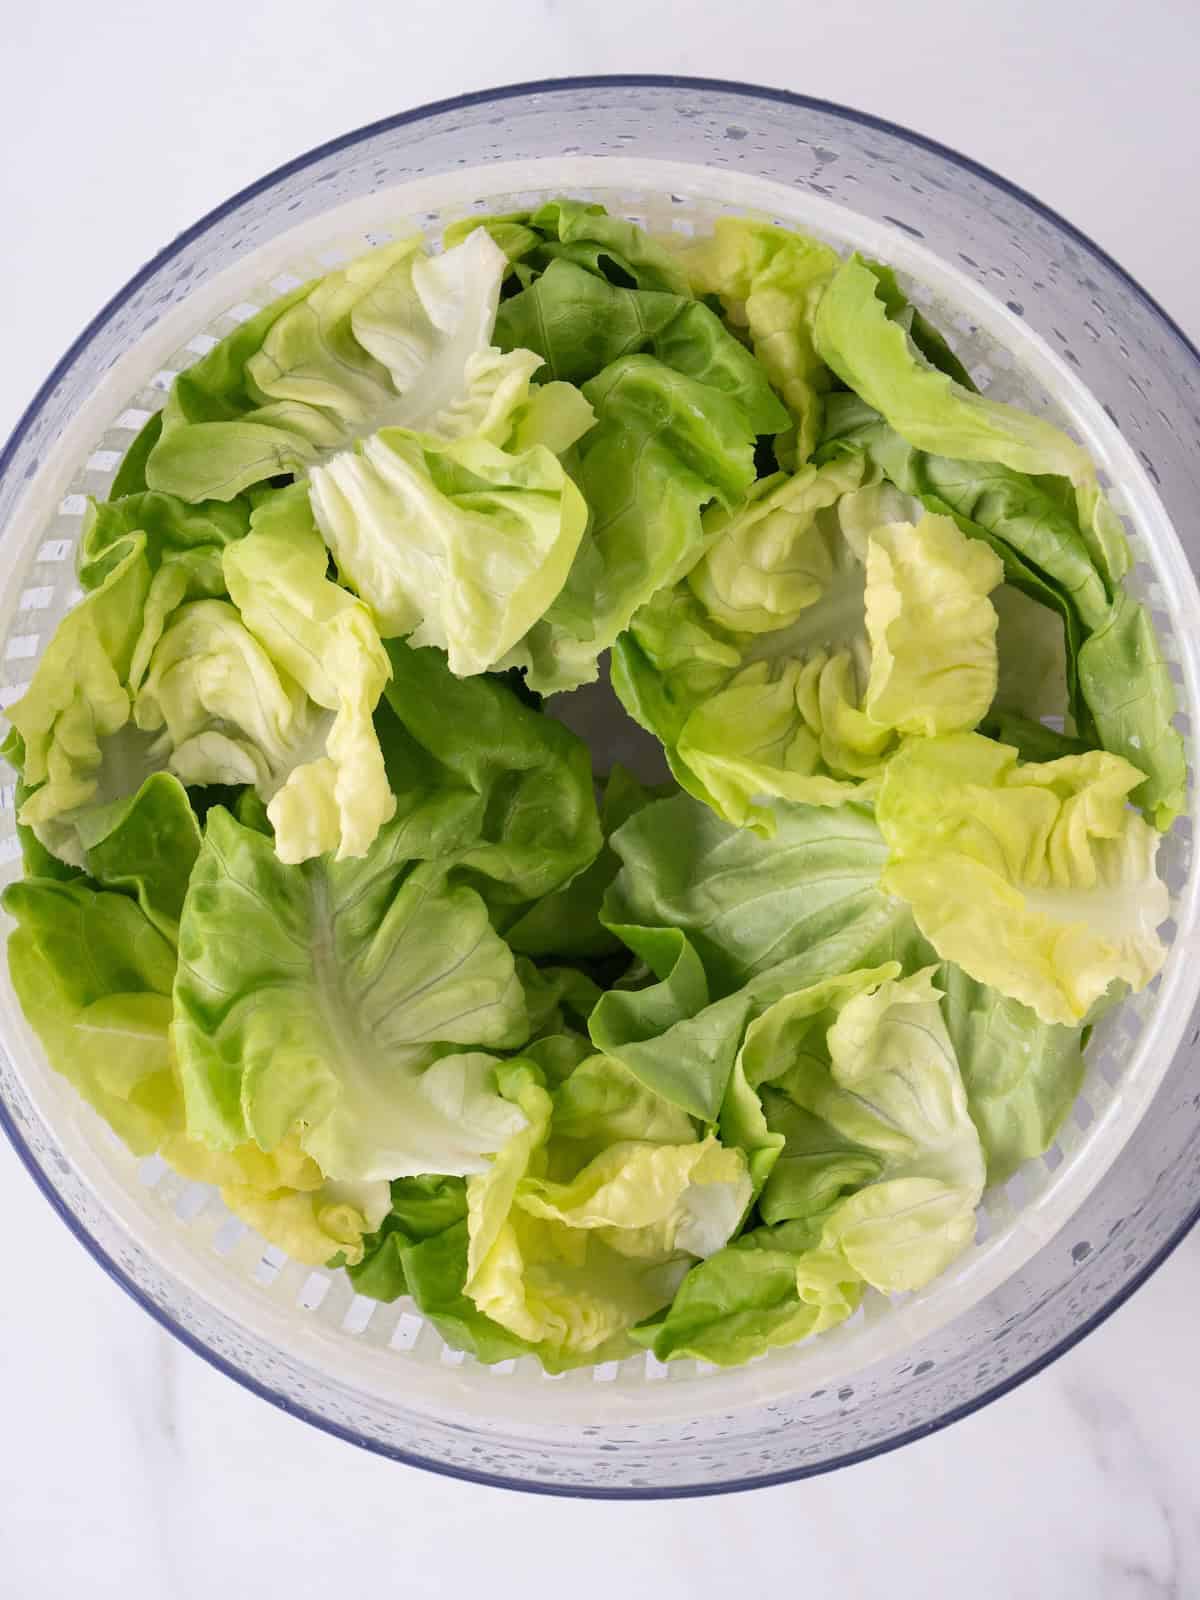 A large bowl holding a basket, like a salad spinner, with rinsed butter lettuce leaves.